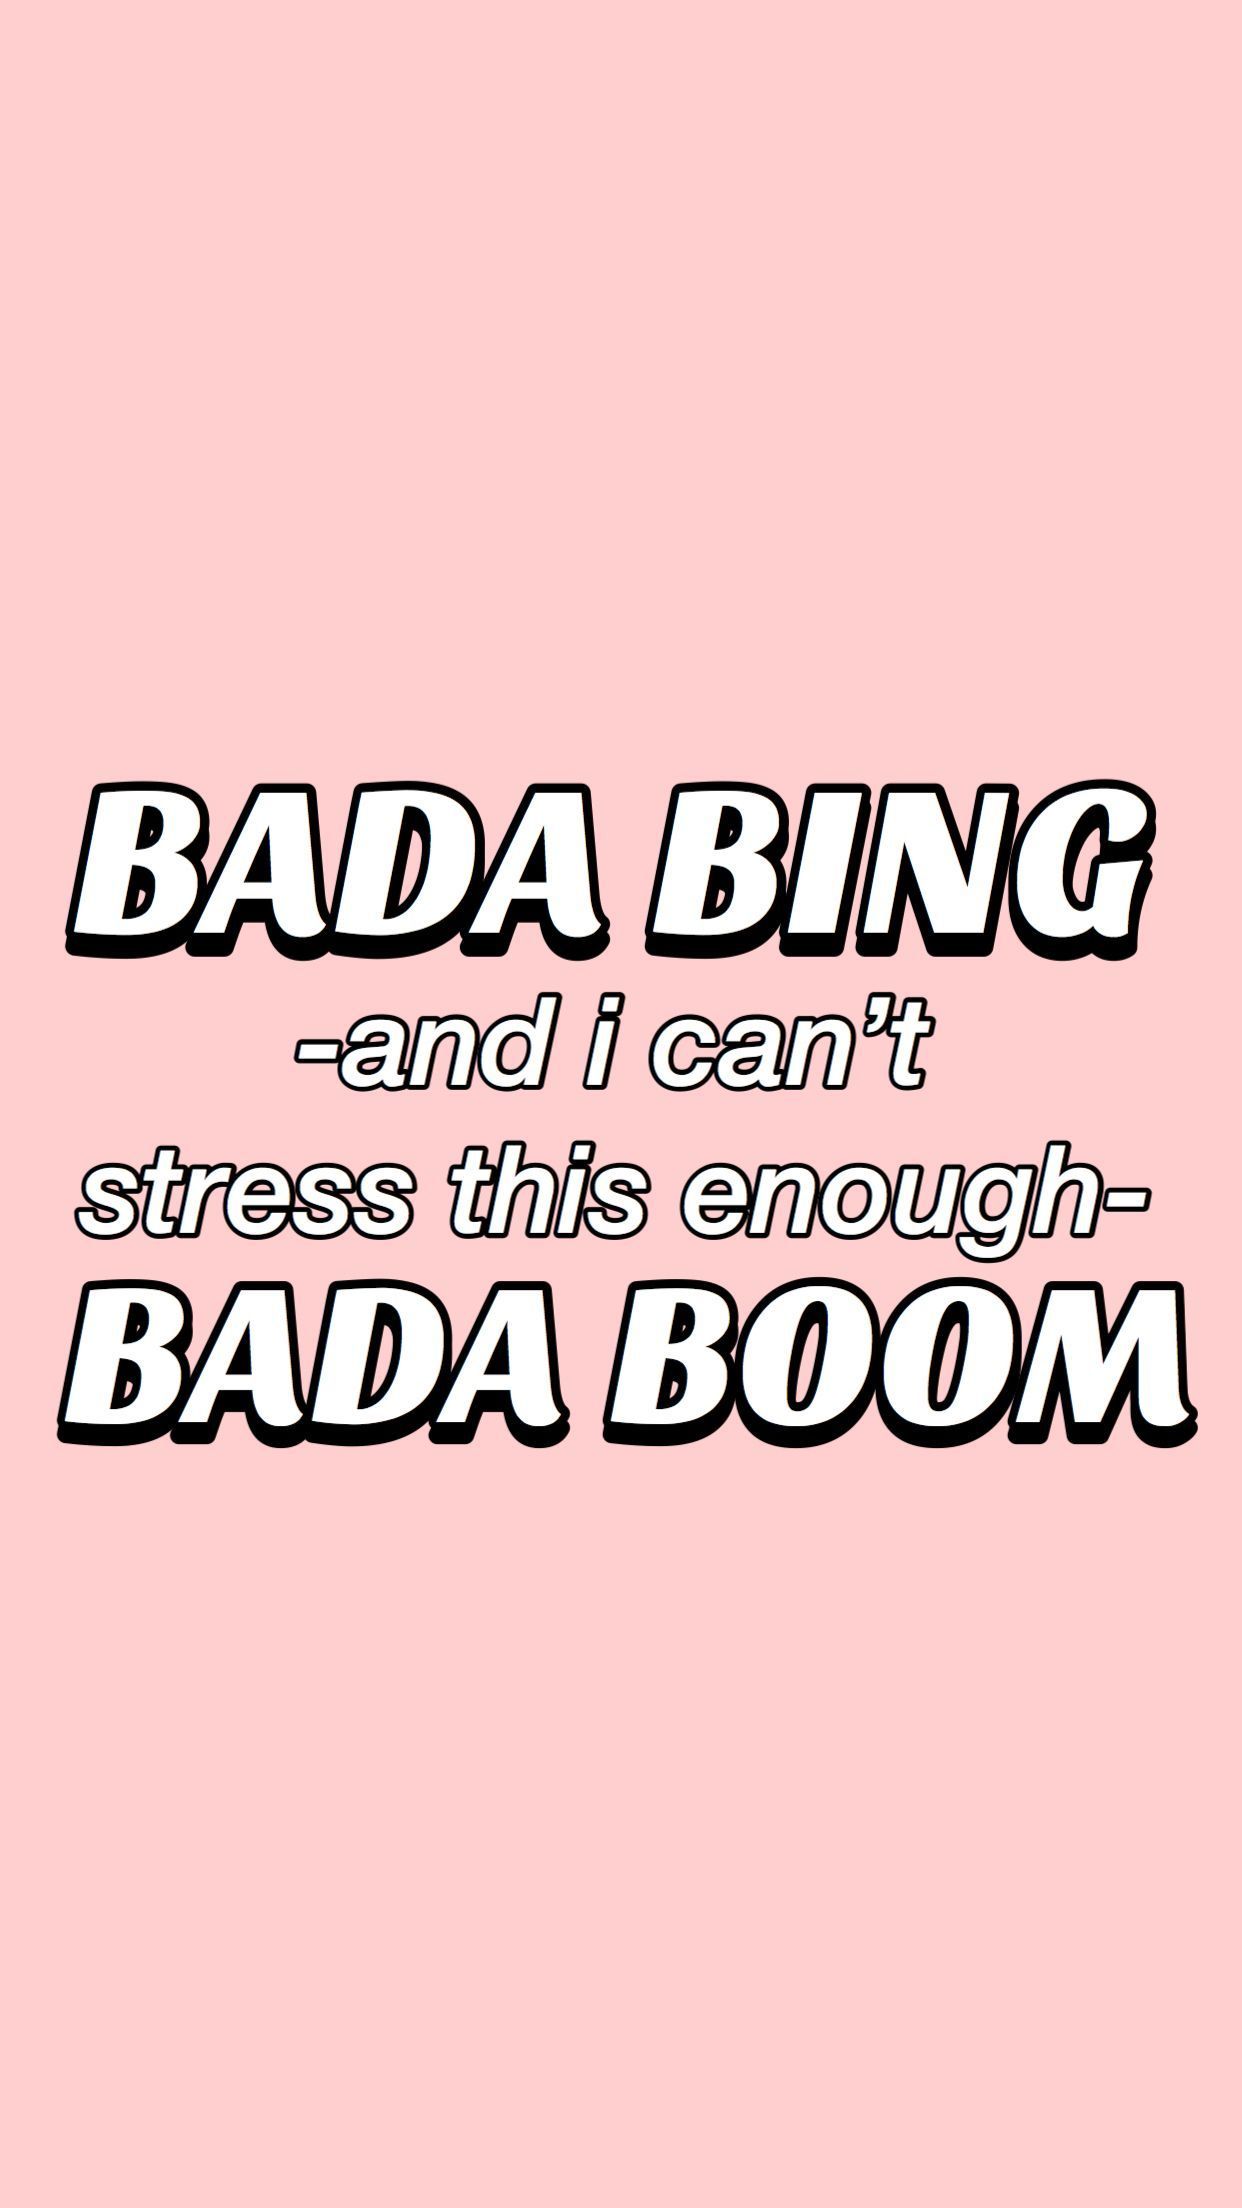 Bada boom and i can't stress this enough badaboom - Funny